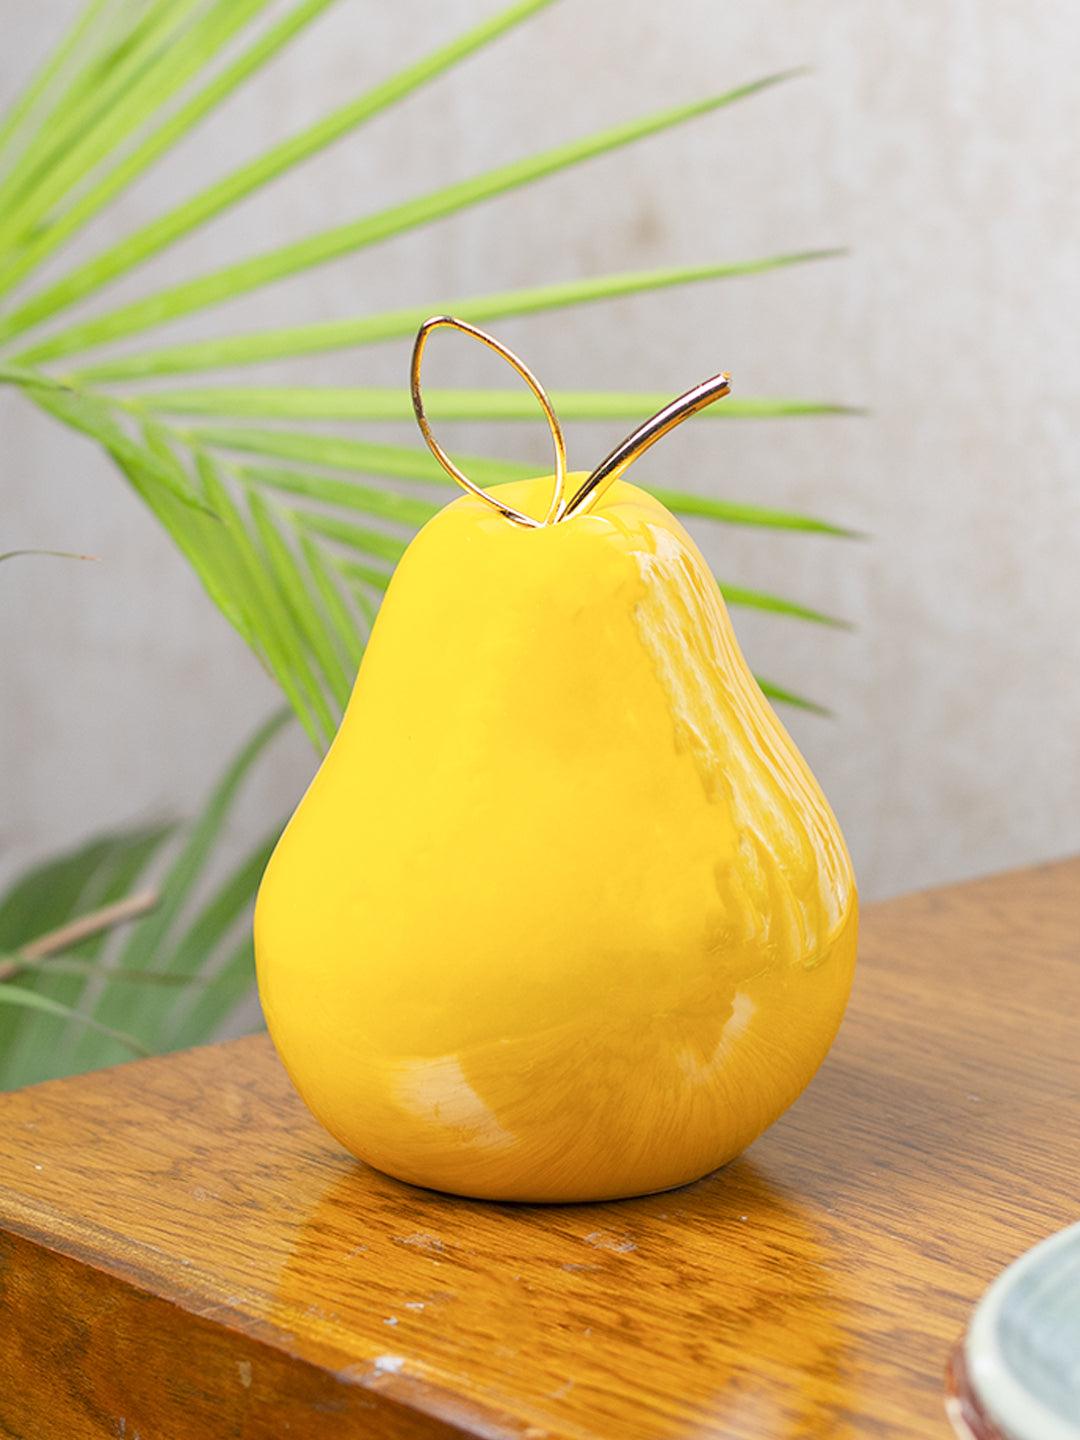 Decorative Ceramic Yellow Pear With Leaf - MARKET 99